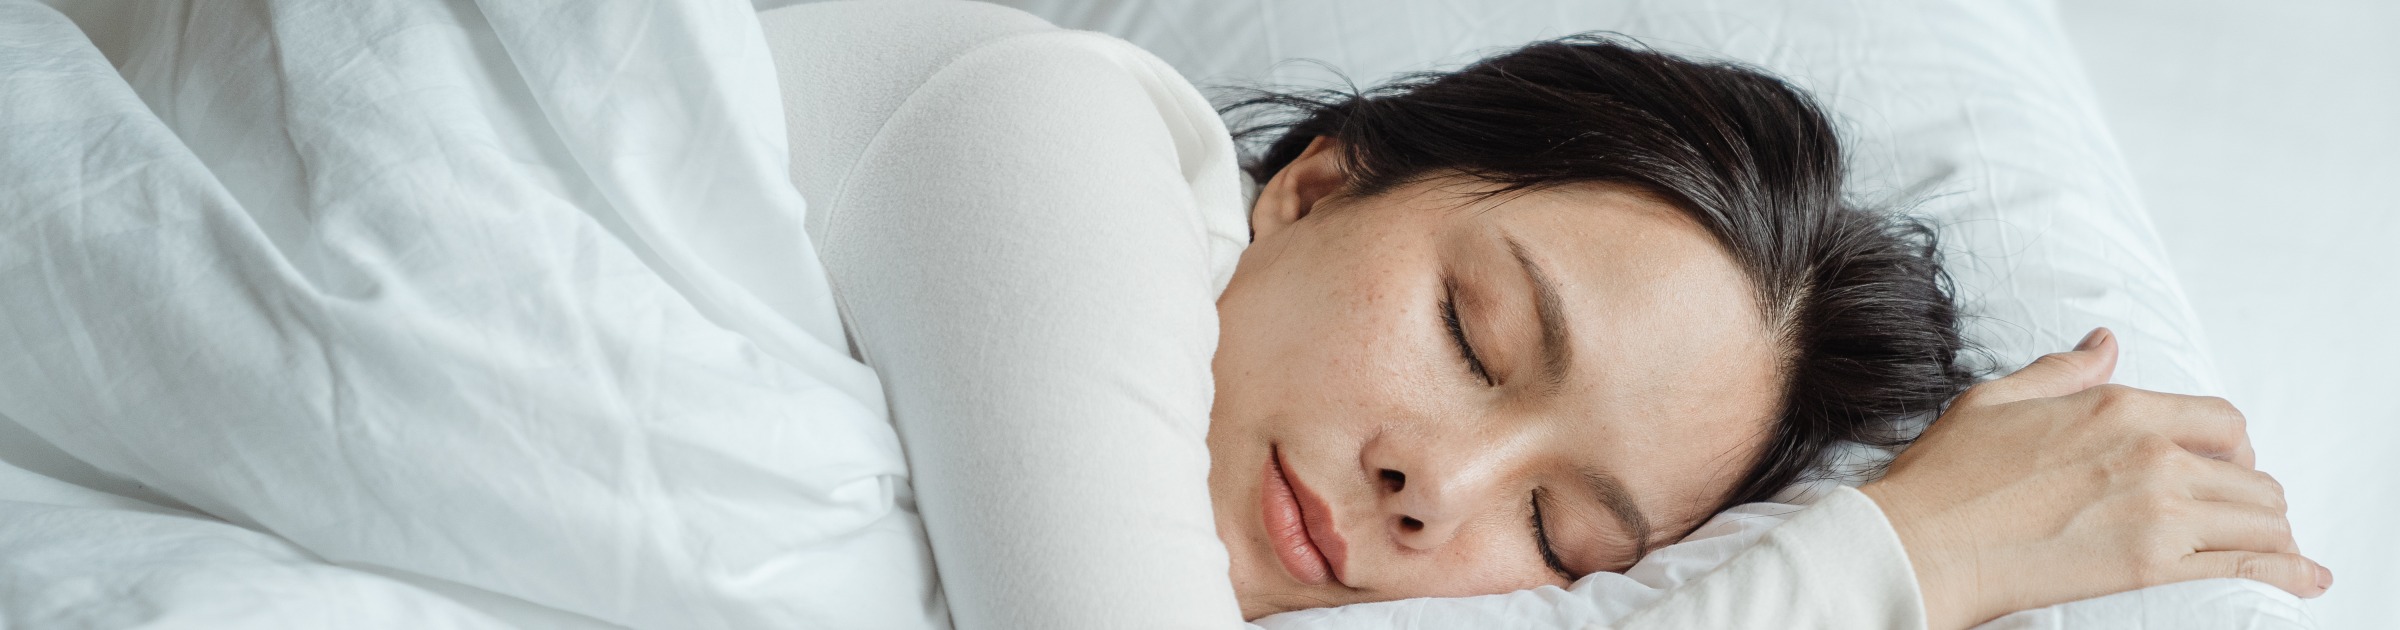 How Does Sleep Impact Recovery and Treatment?